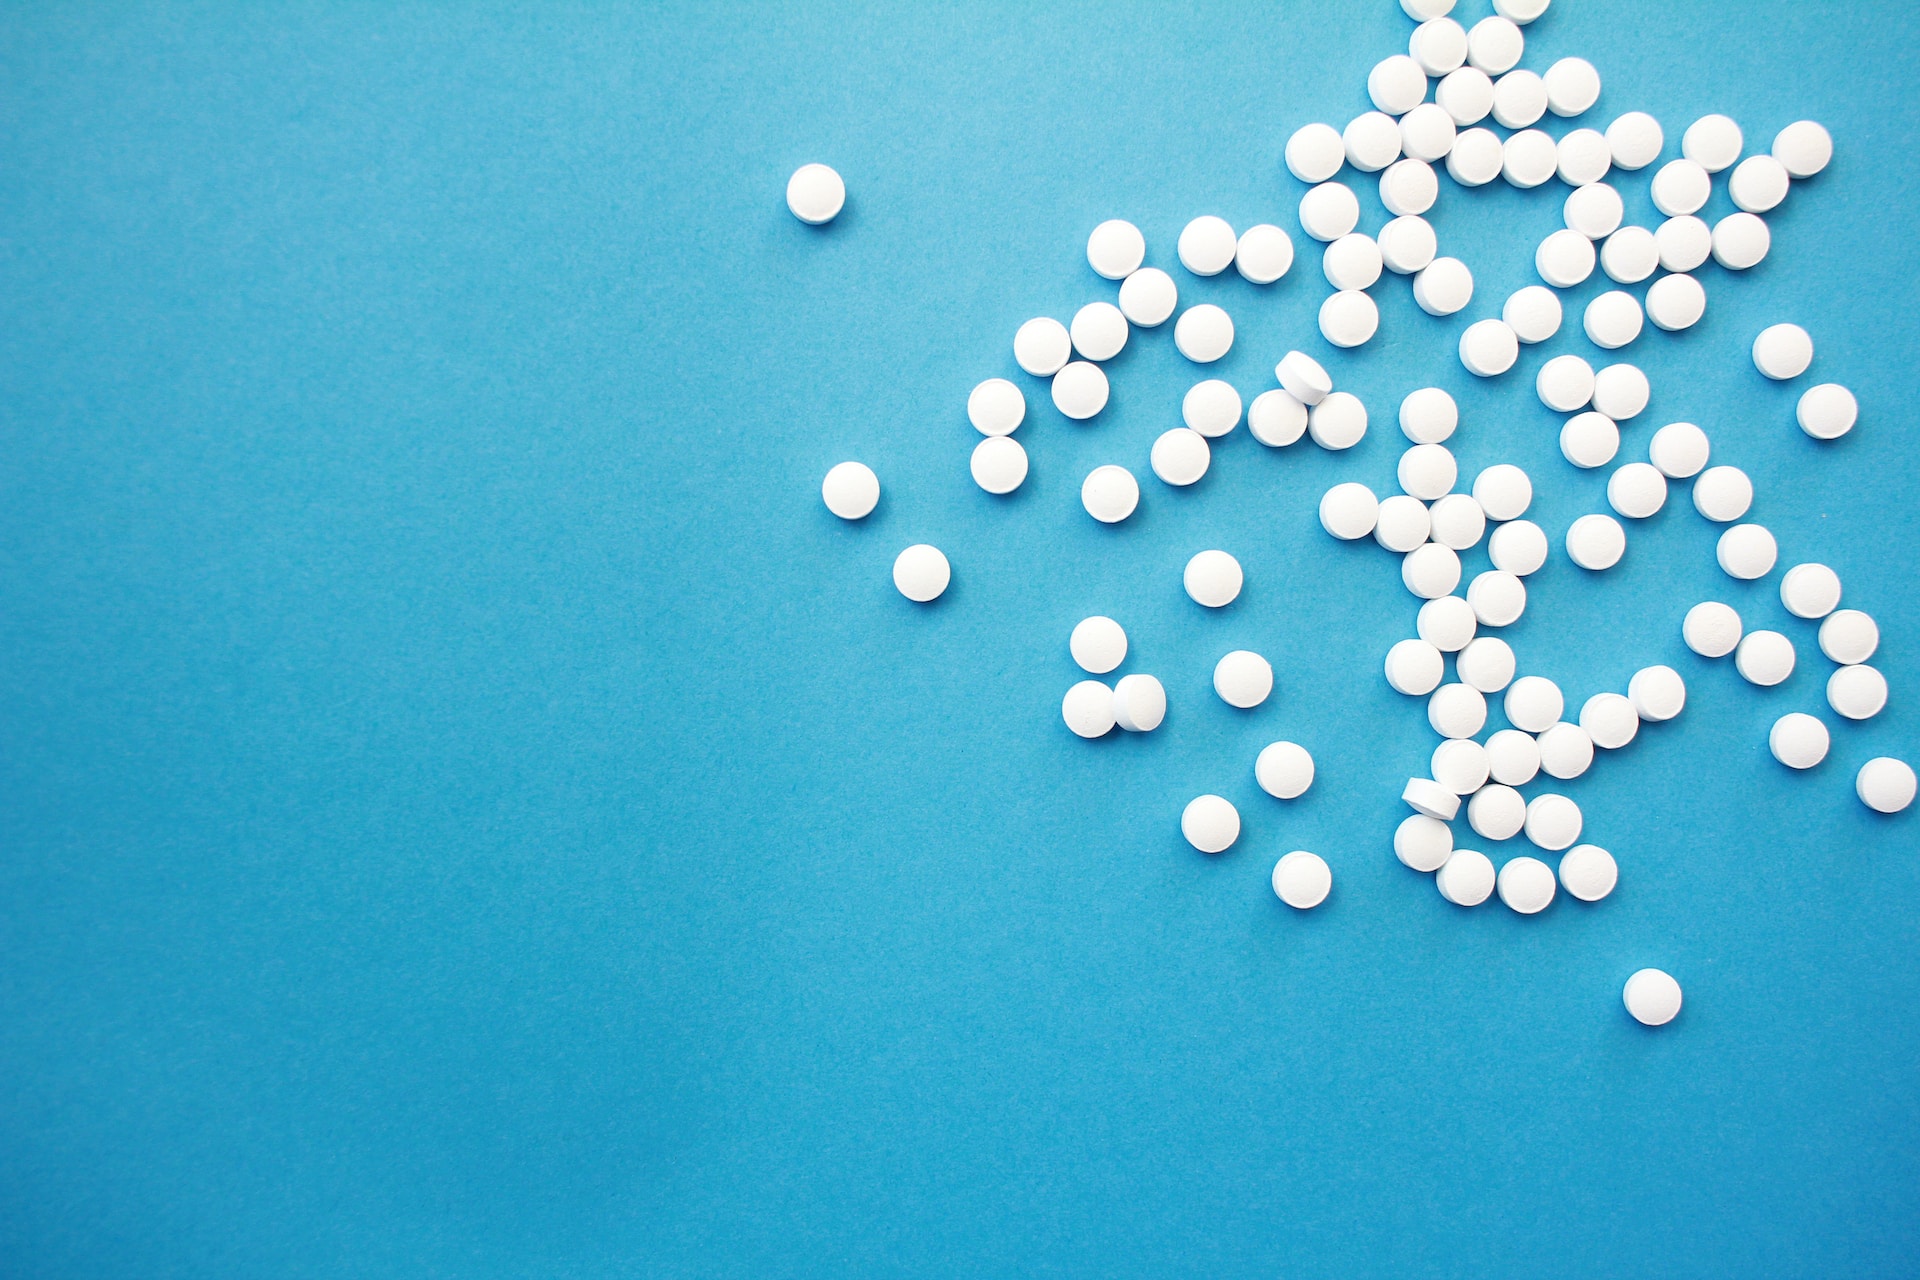 White pills on a blue background